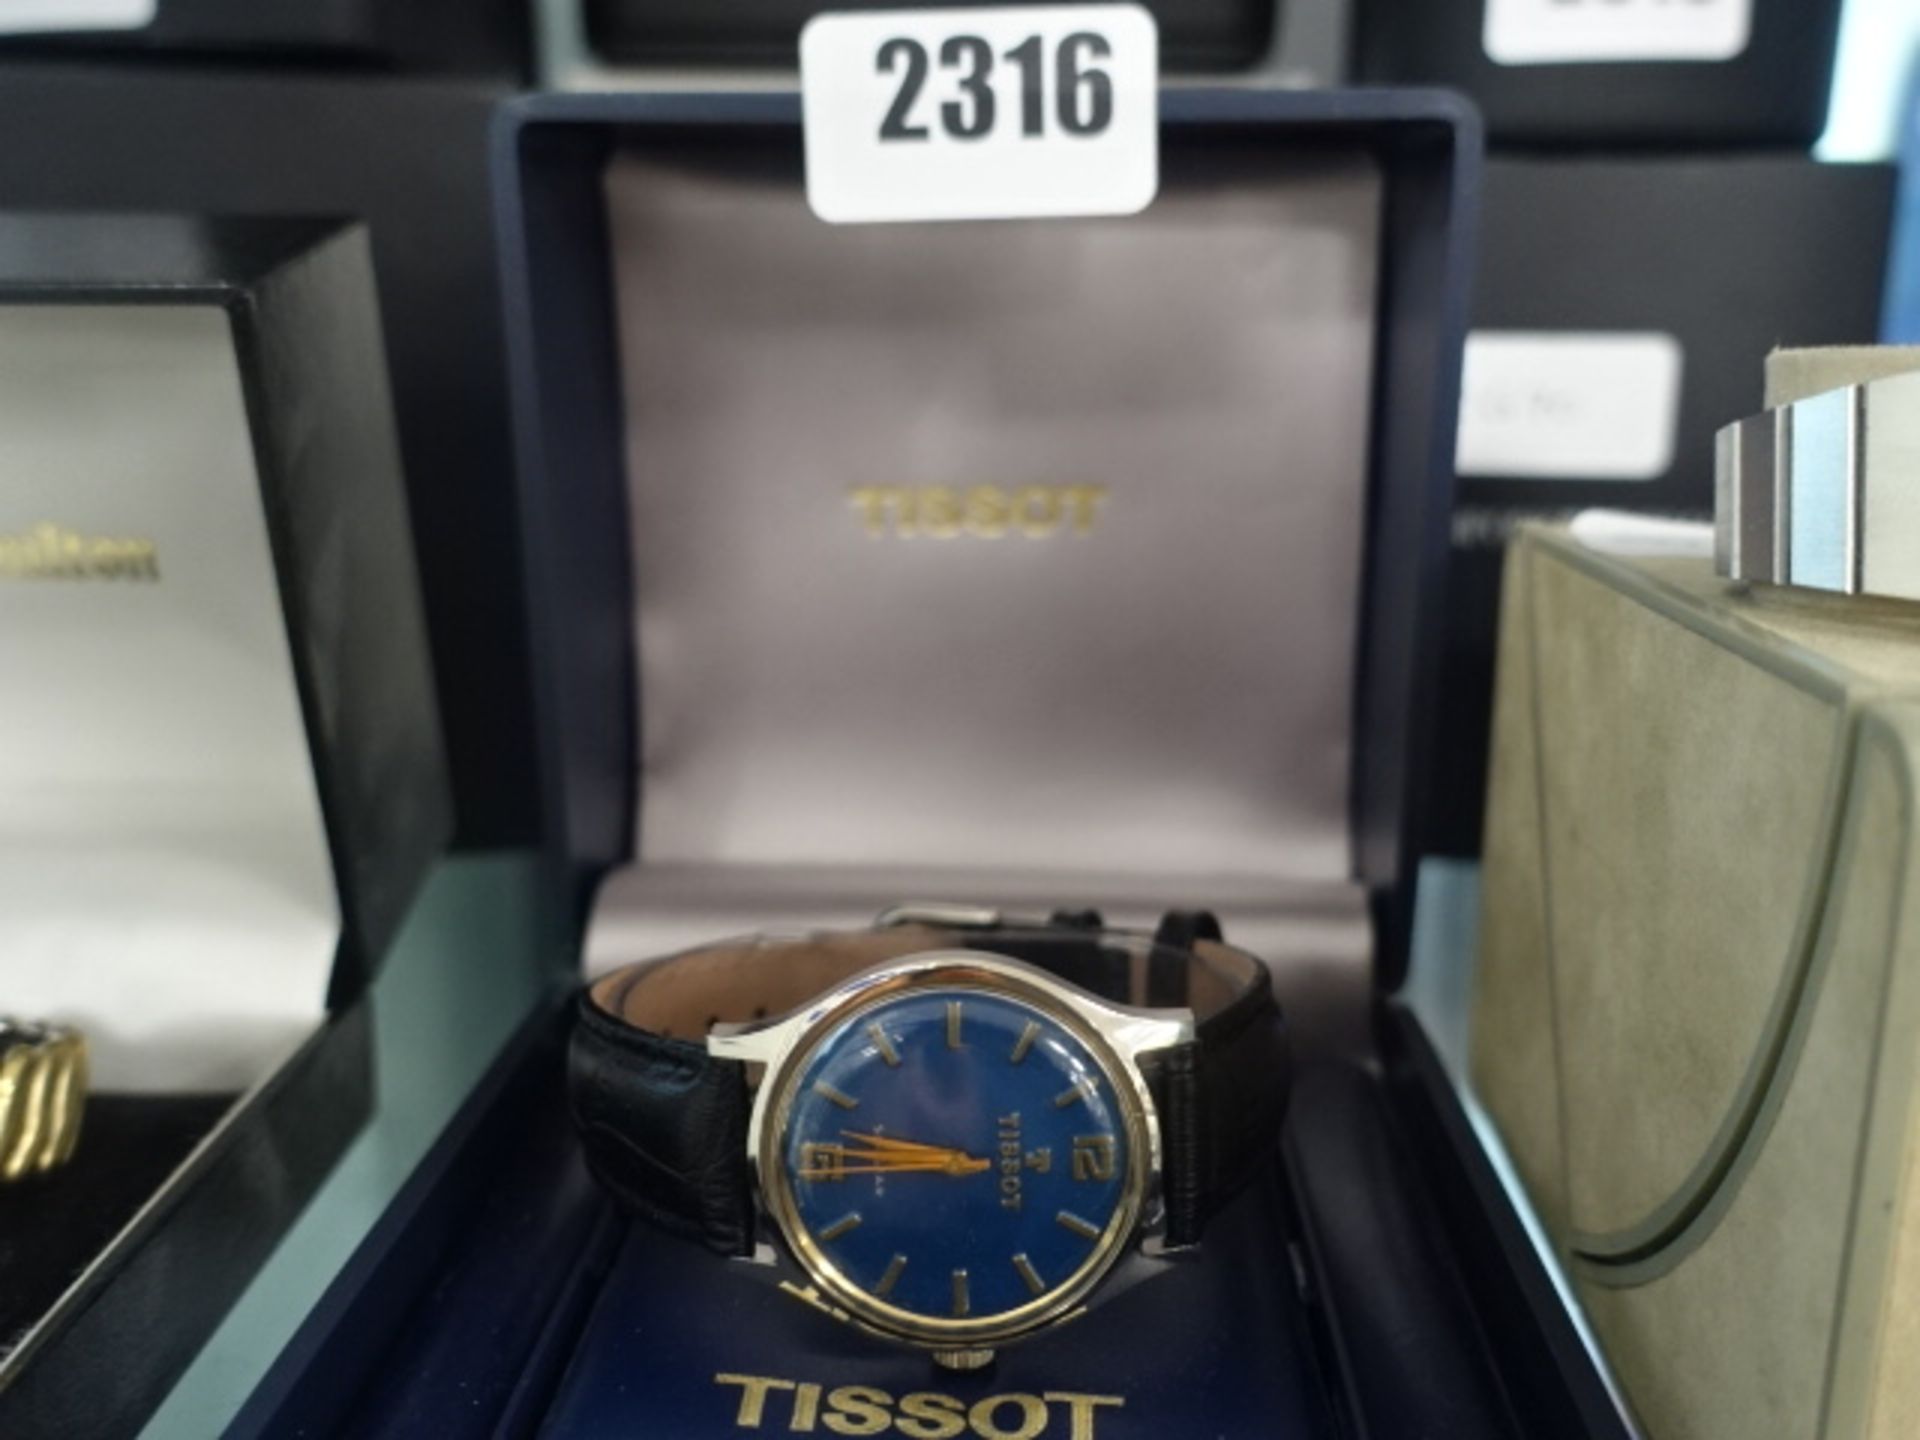 Tissot gents wristwatch with blue face and black leather strap in box